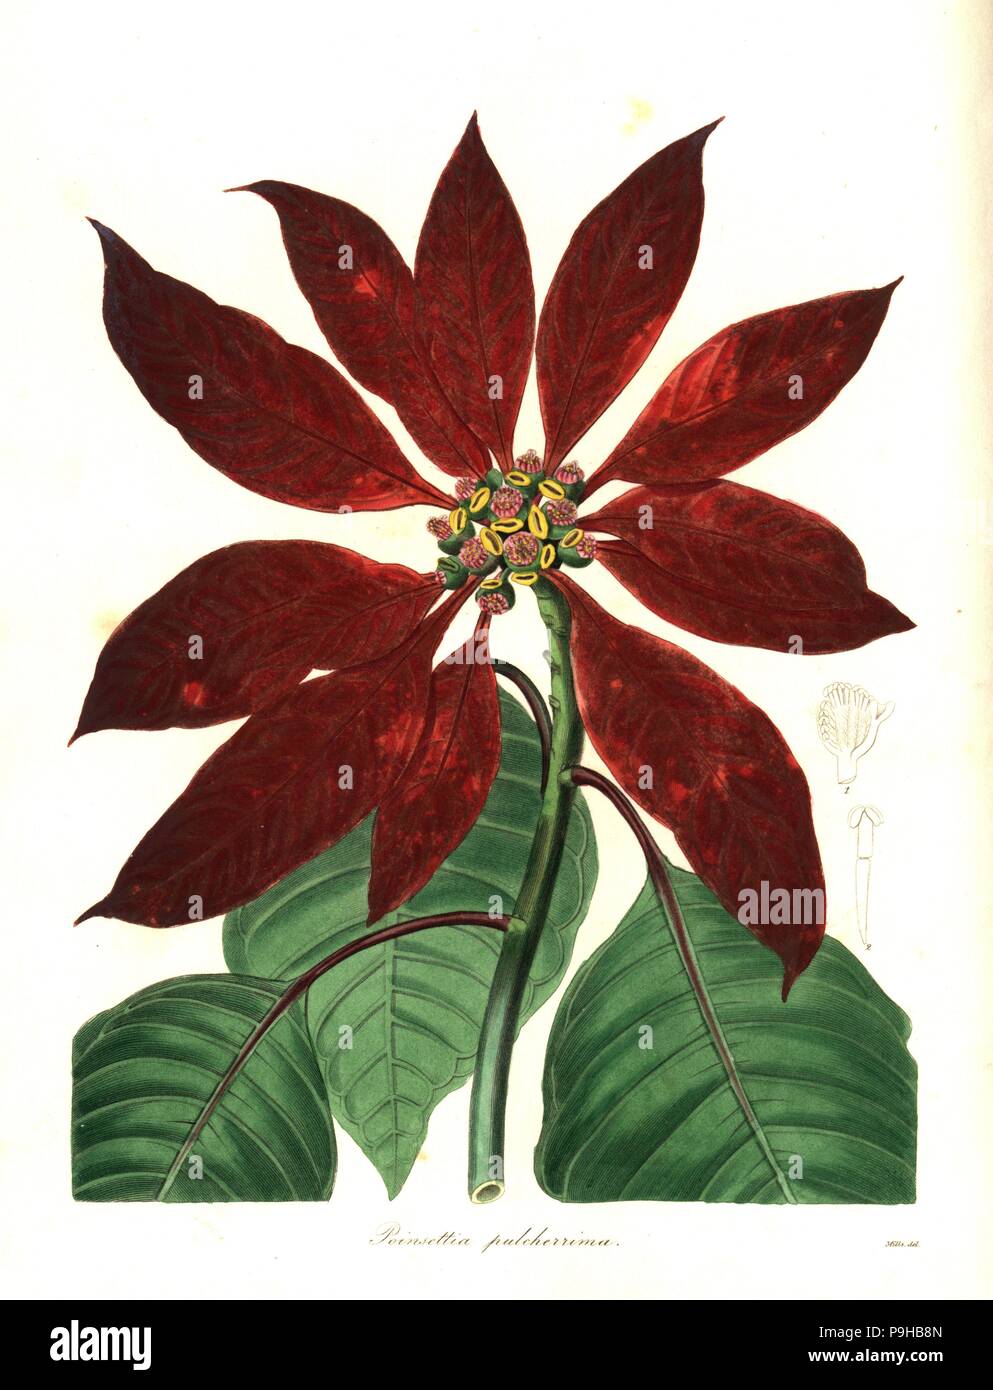 Christmas star or poinsettia, Euphorbia pulcherrima (Most beautiful poinsettia, Poinsettia pulcherrima). Handcoloured copperplate engraving after a botanical illustration by Mills from Benjamin Maund and the Rev. John Stevens Henslow's The Botanist, London, 1836. Stock Photo